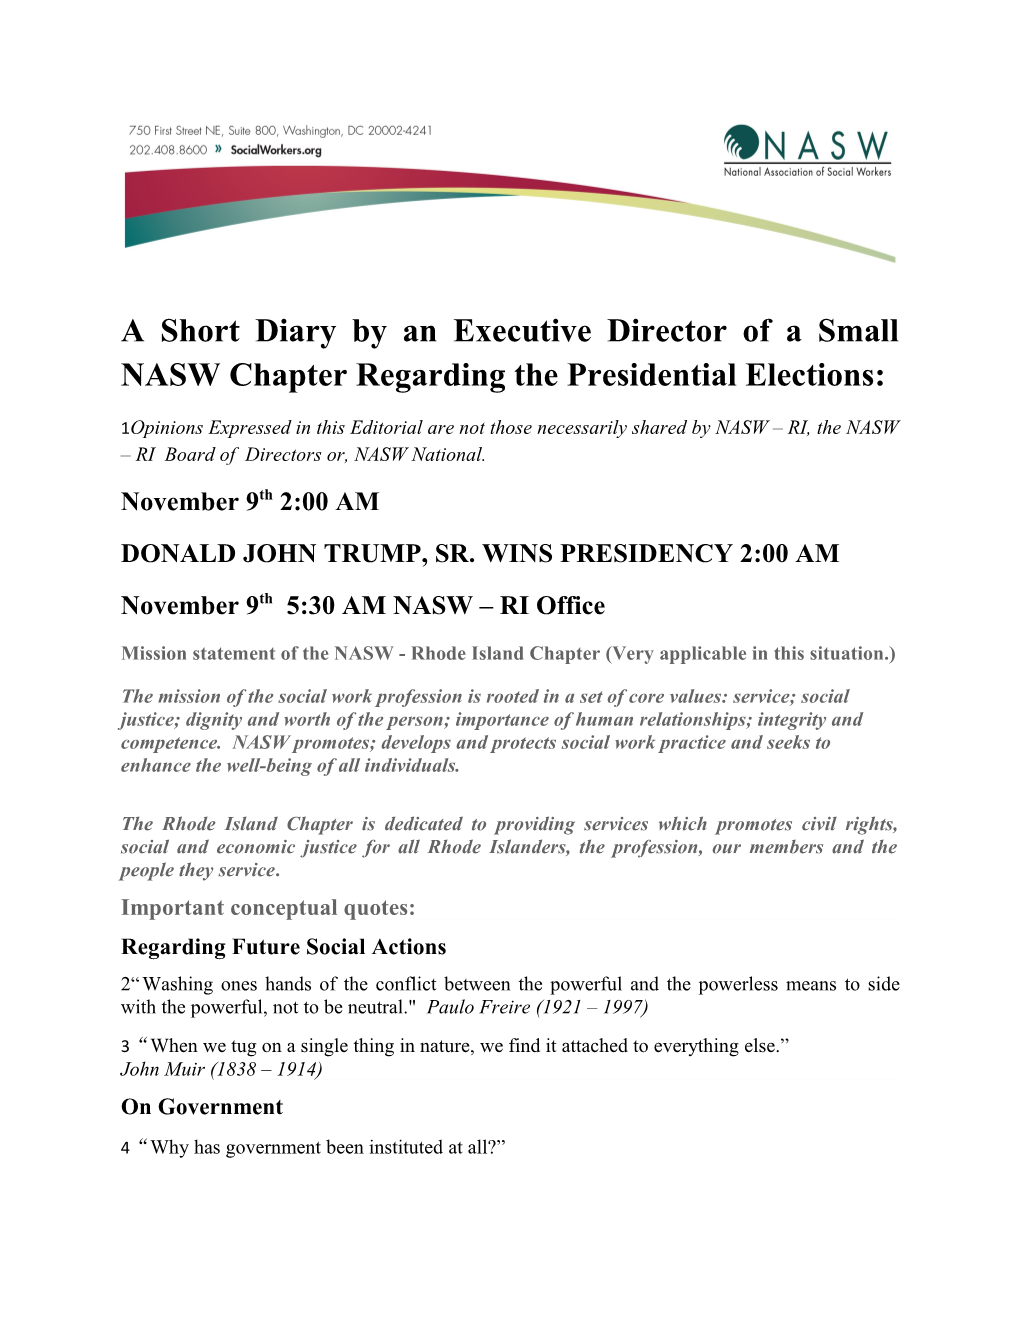 A Short Diary by an Executive Director of a Small NASW Chapter Regarding the Presidential